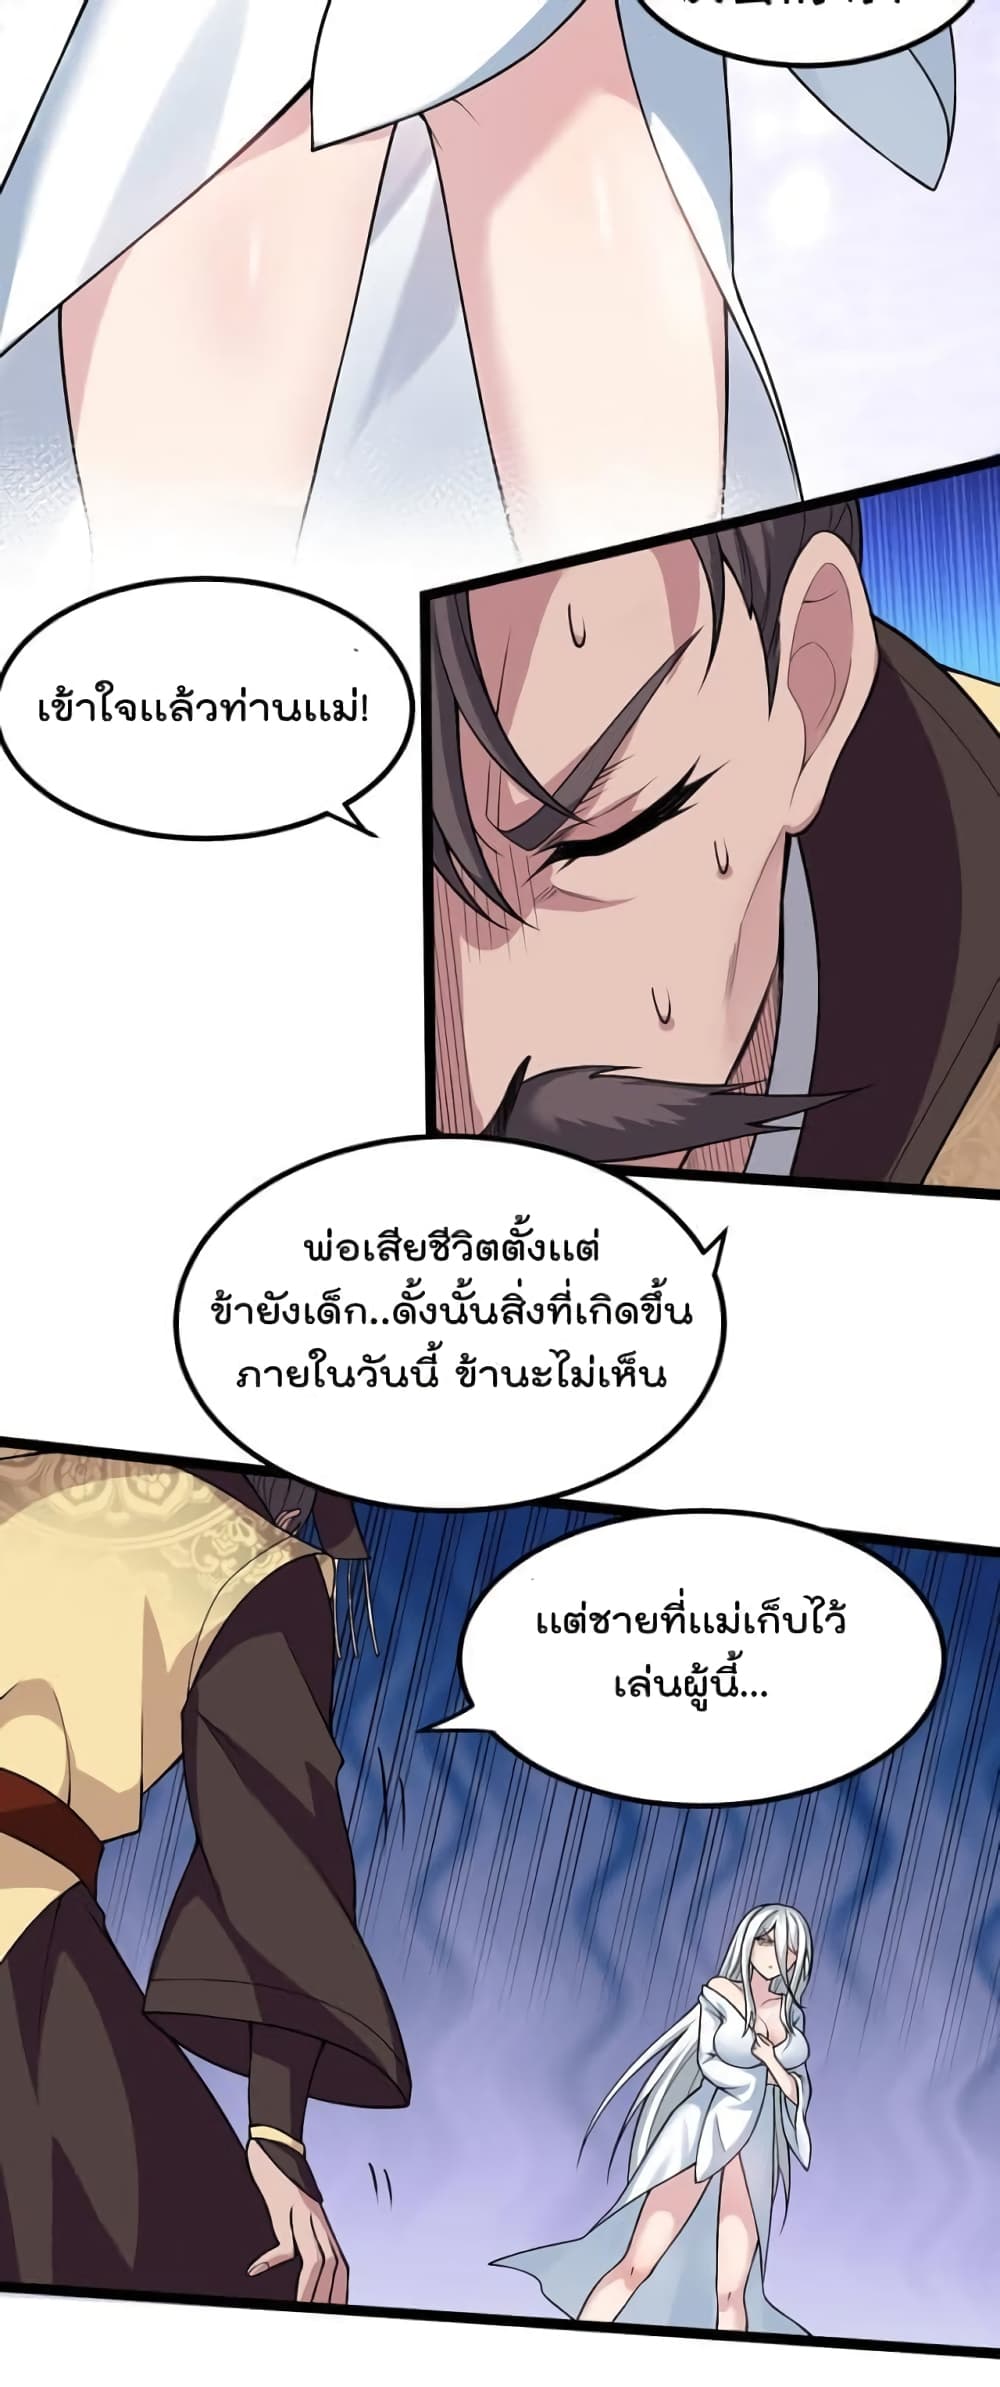 Godsian Masian from Another World ตอนที่ 121 (2)